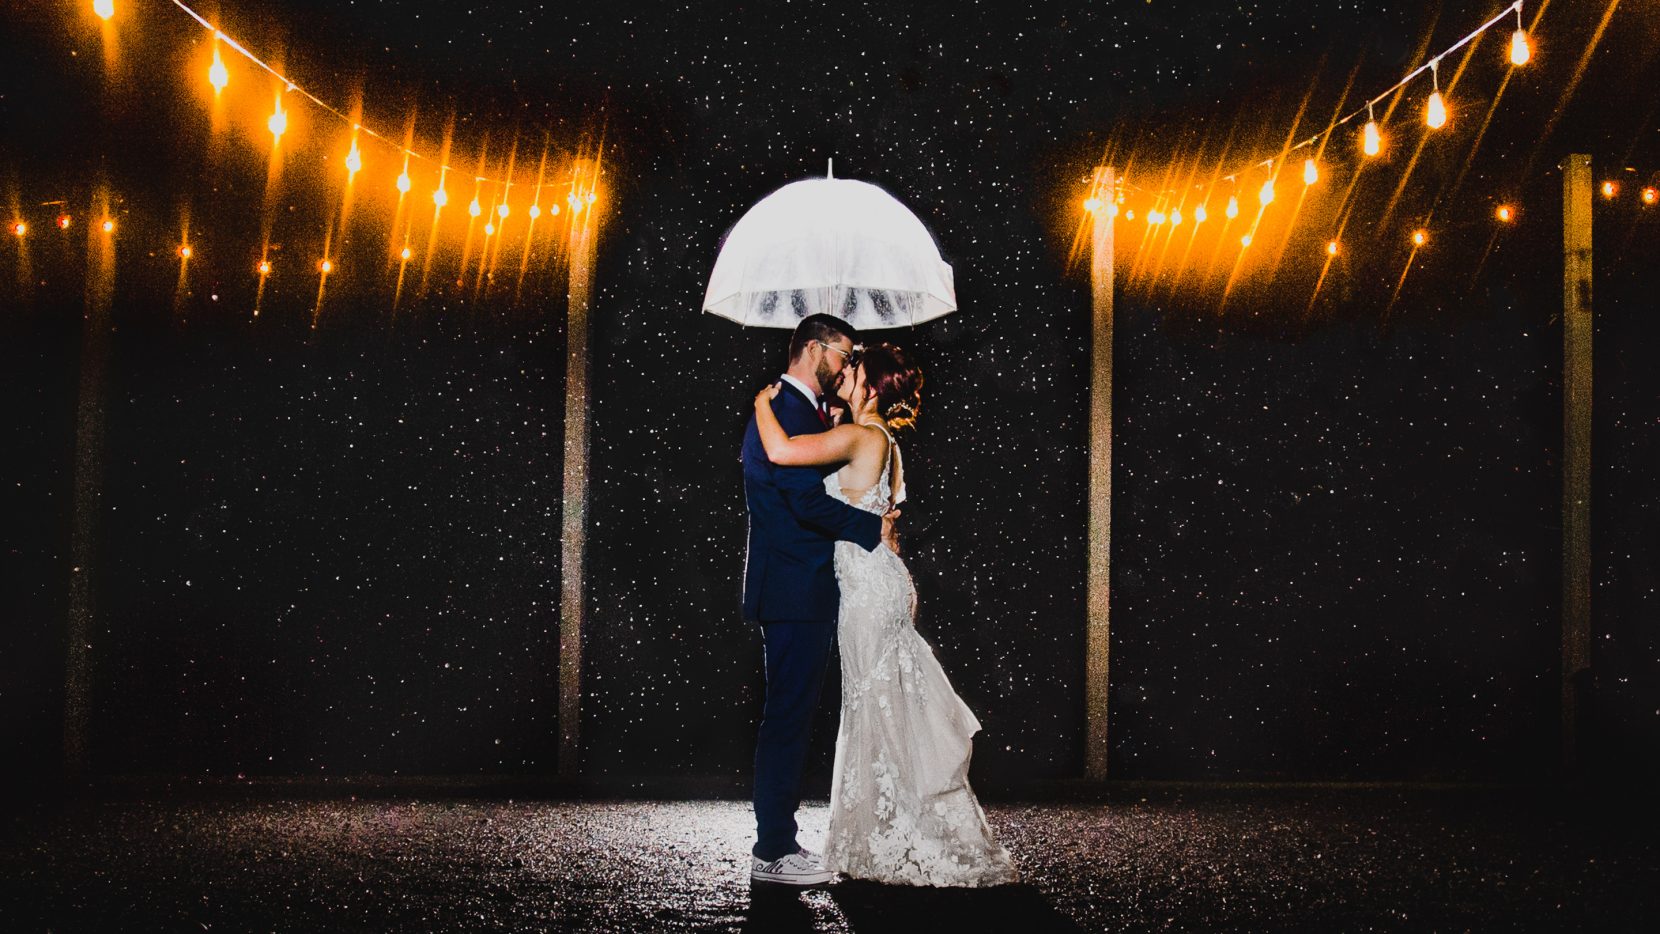 bride groom kissing under clear umbrella rain with cafe lights